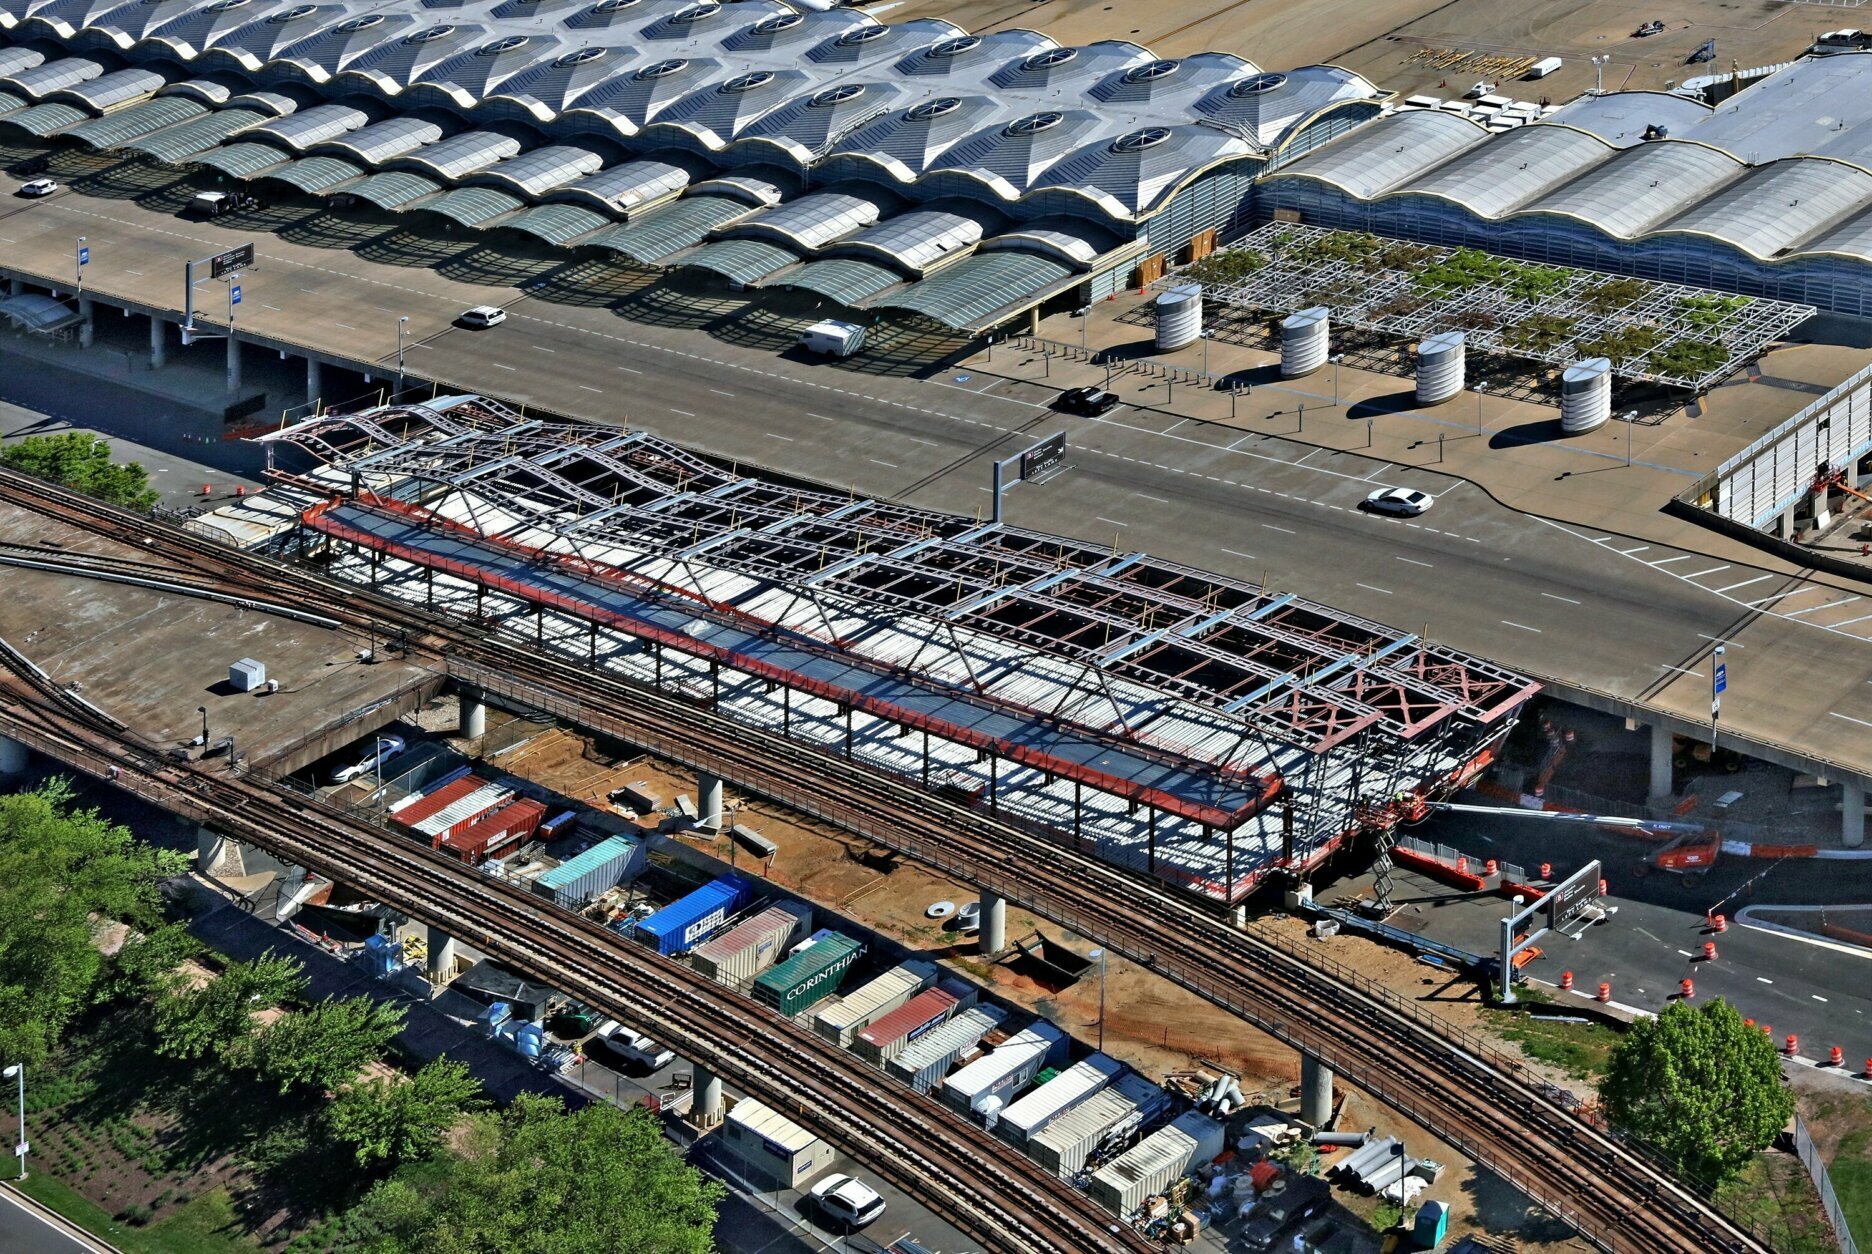 <p>MWAA says overnight work on a new terminal has shifted to day work, with steel frames going up and exterior panels and interior fixtures for the new concourse in place.</p>
